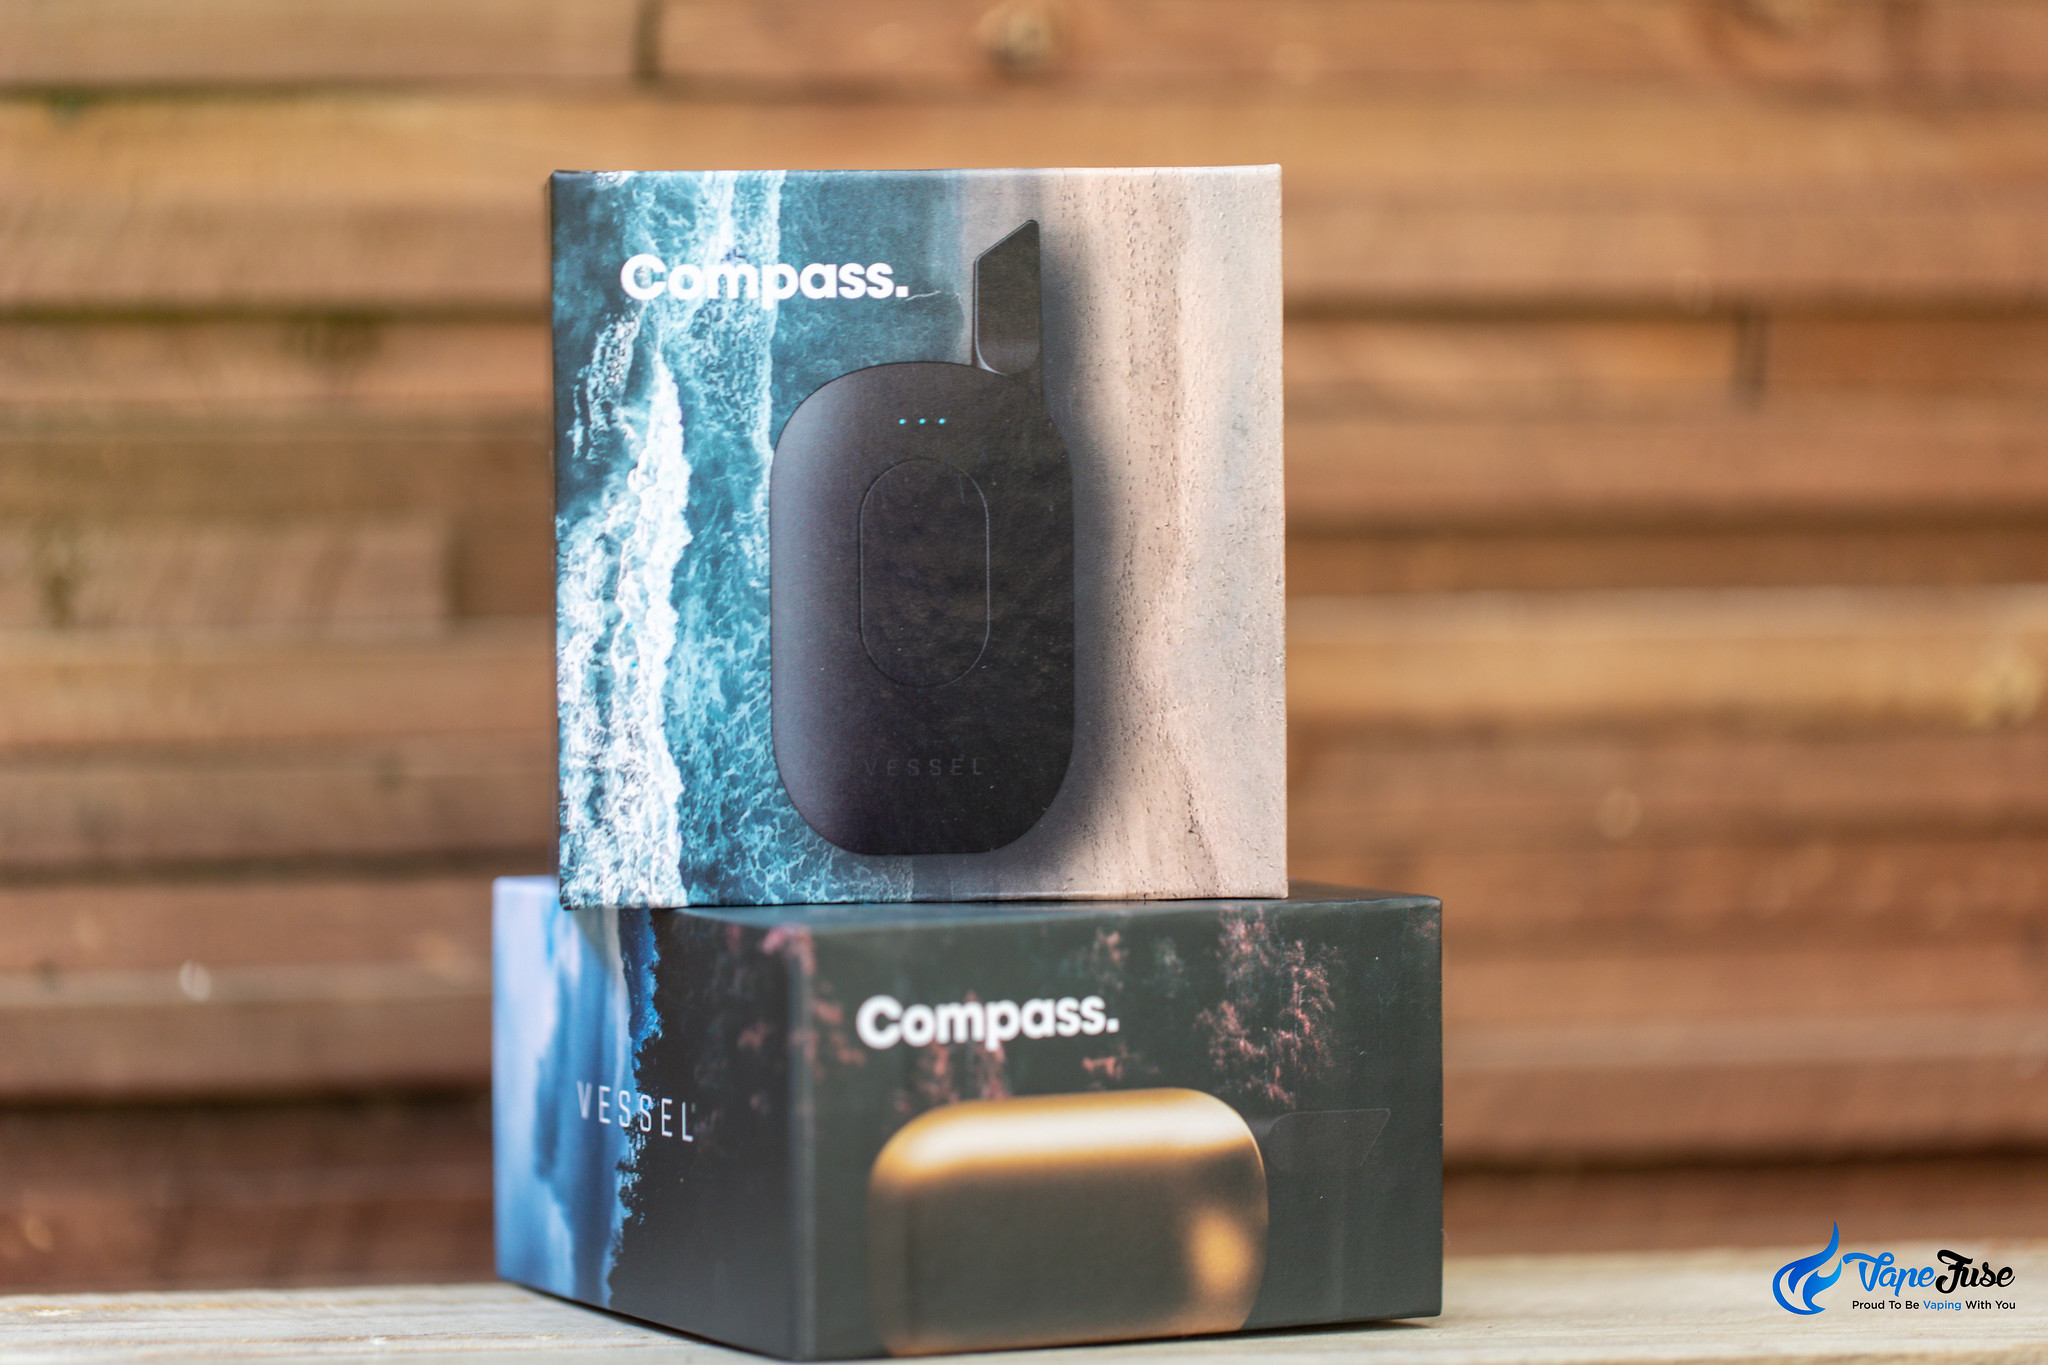 Compass vaporizer batteries in boxes